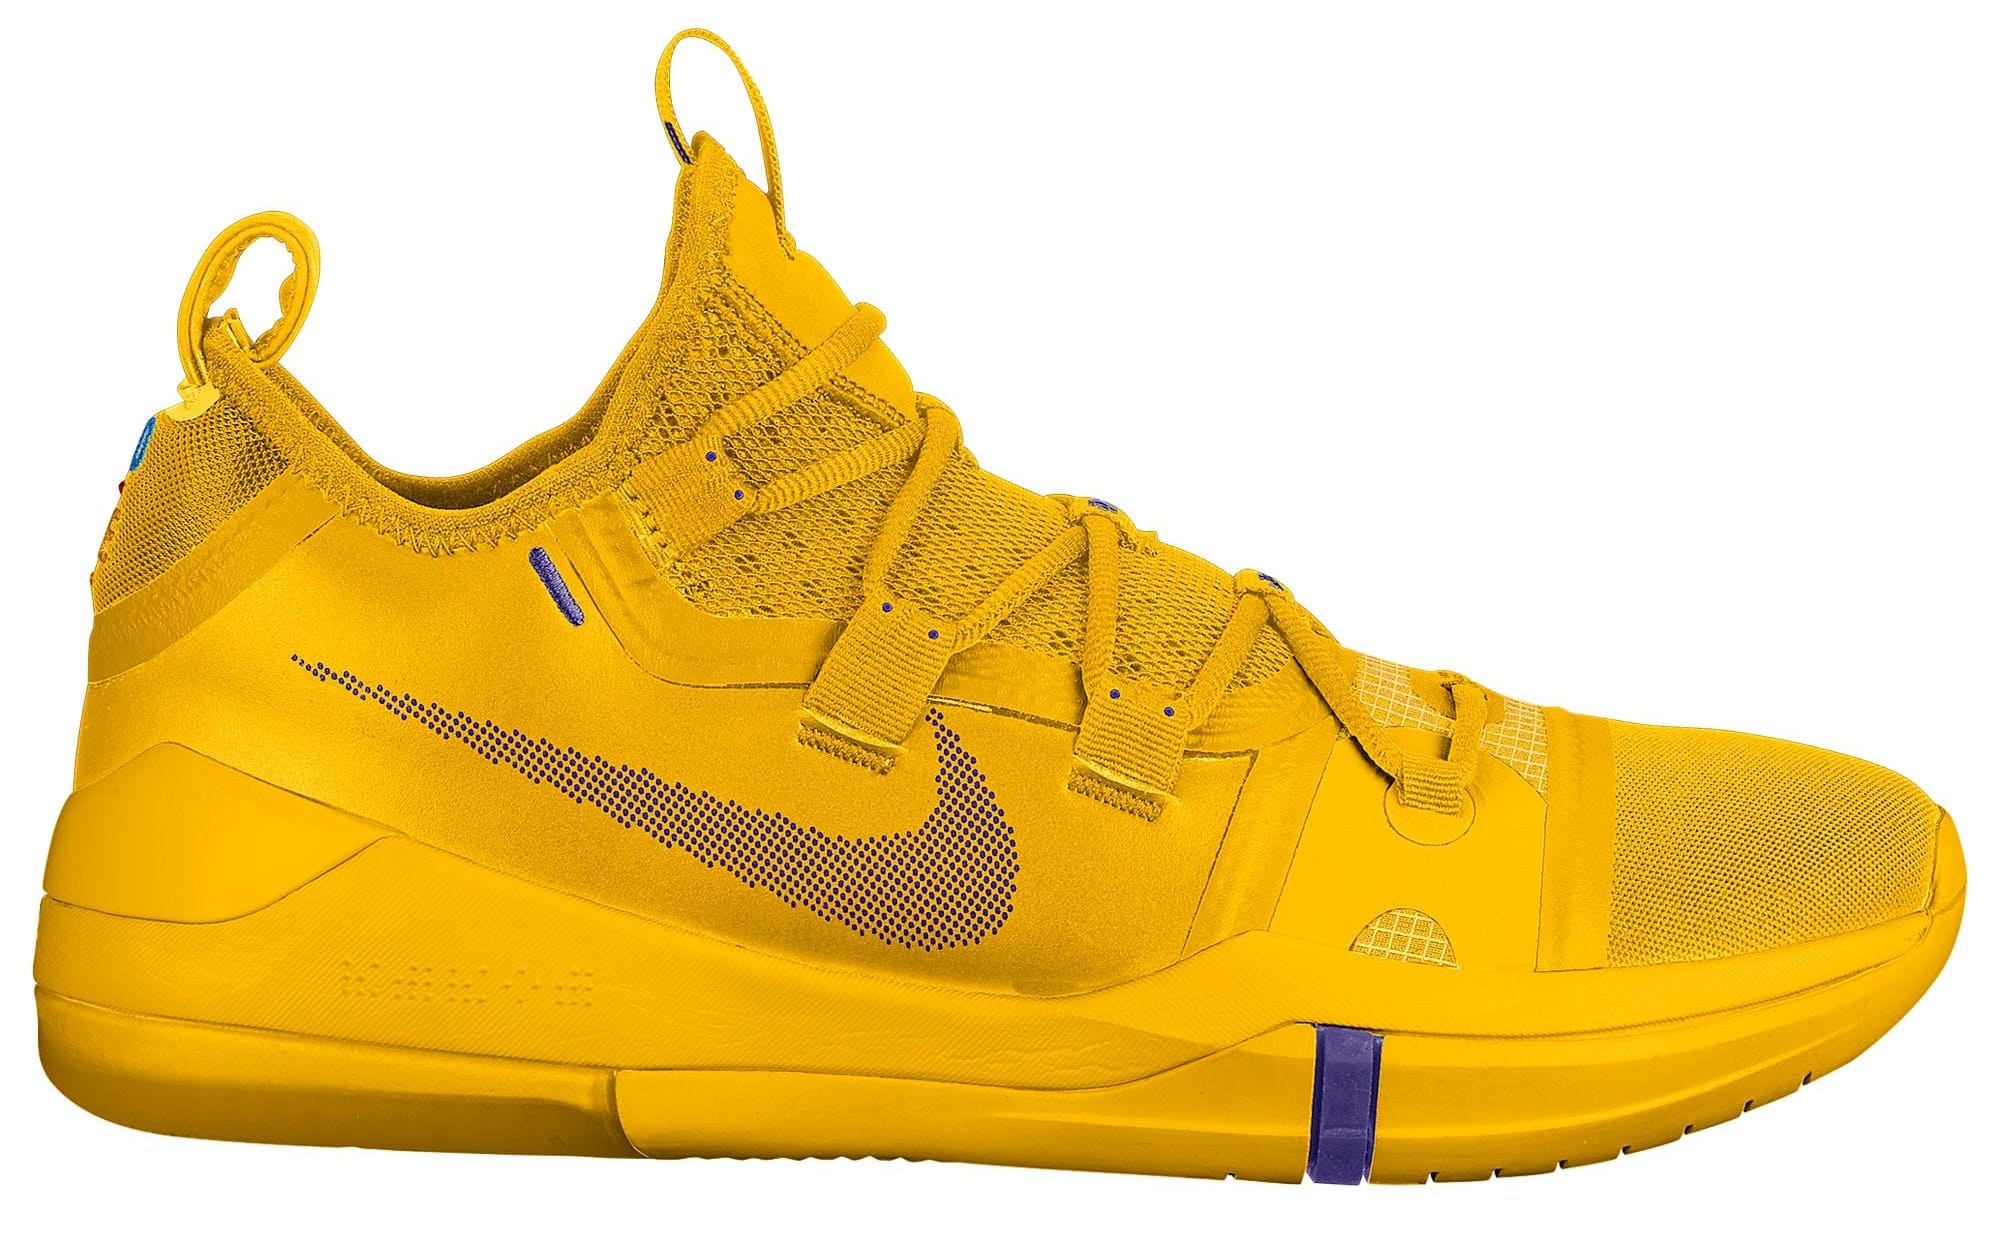 nike-kobe-ad-color-pack-yellow-lateral